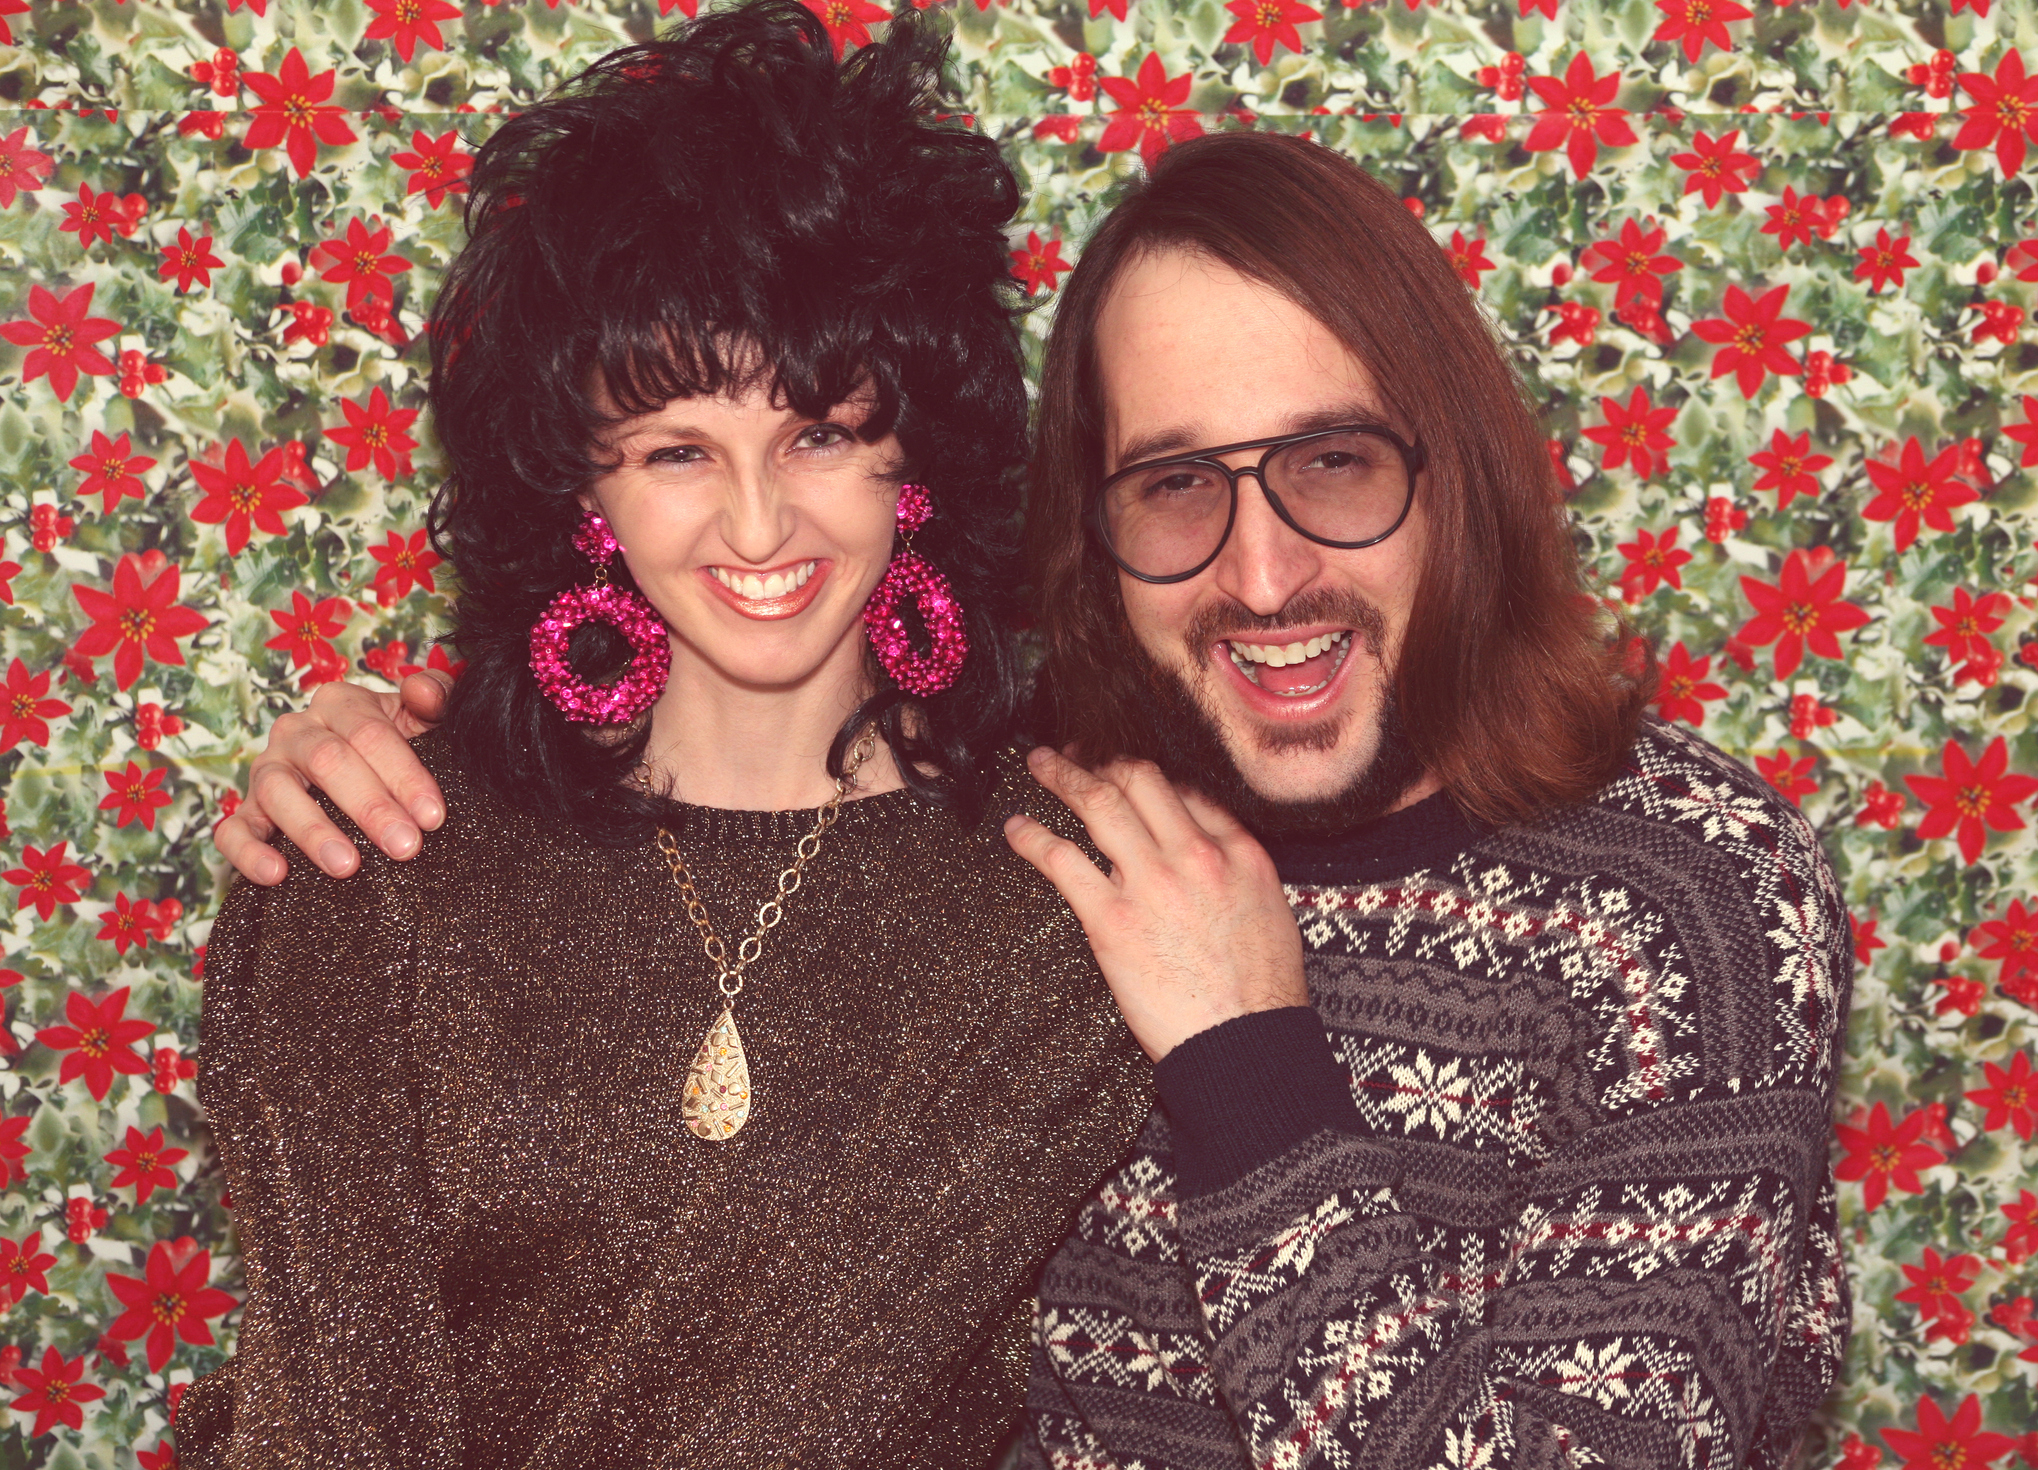 Two people smiling, dressed in vintage style with patterned sweaters, standing before a floral backdrop